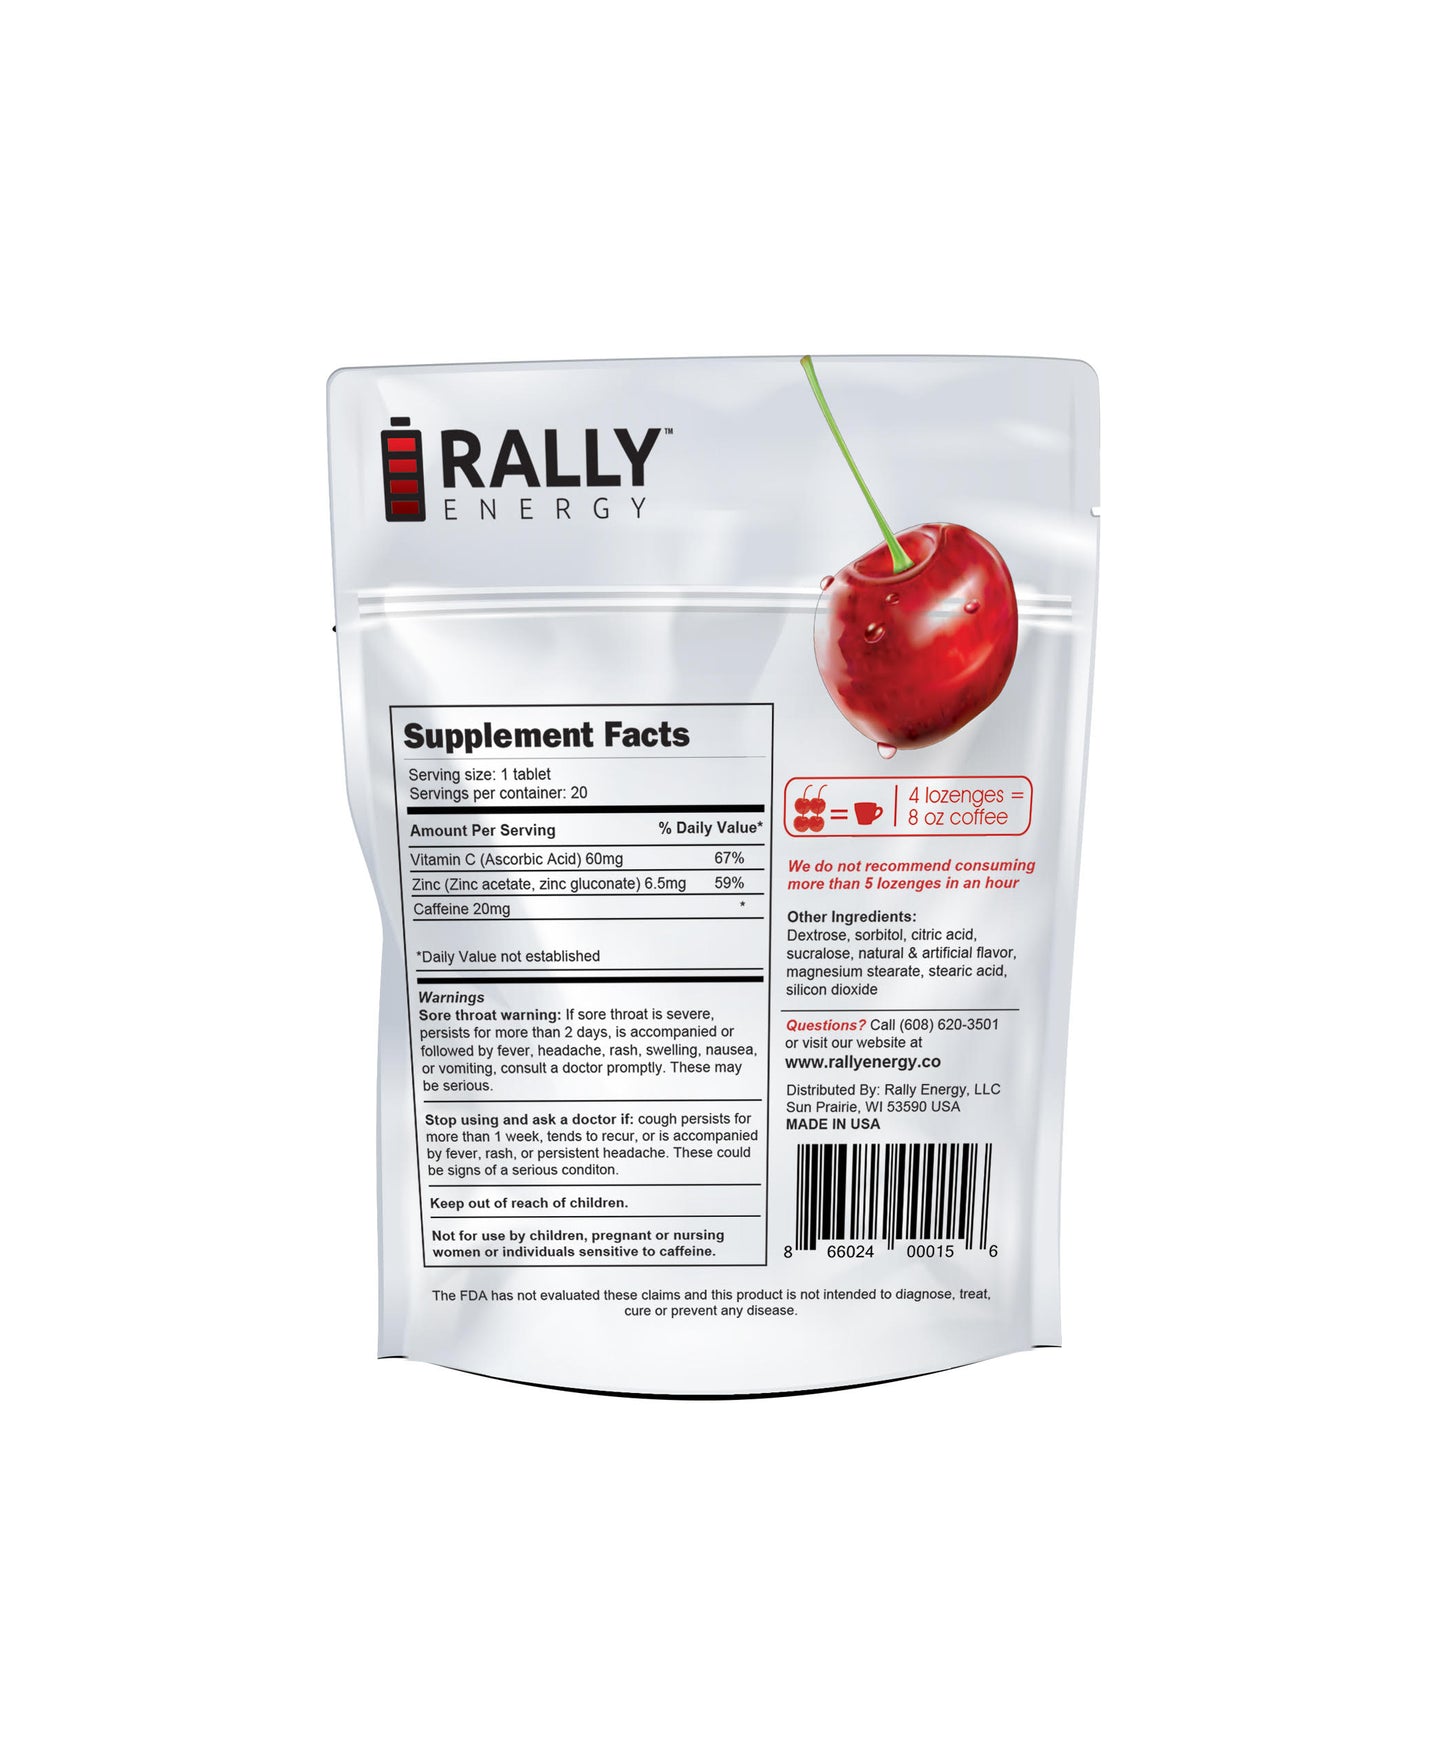 Rally Energy Cough Relief - Caffeinated, Cherry Flavored Cough Lozenges - Travel size